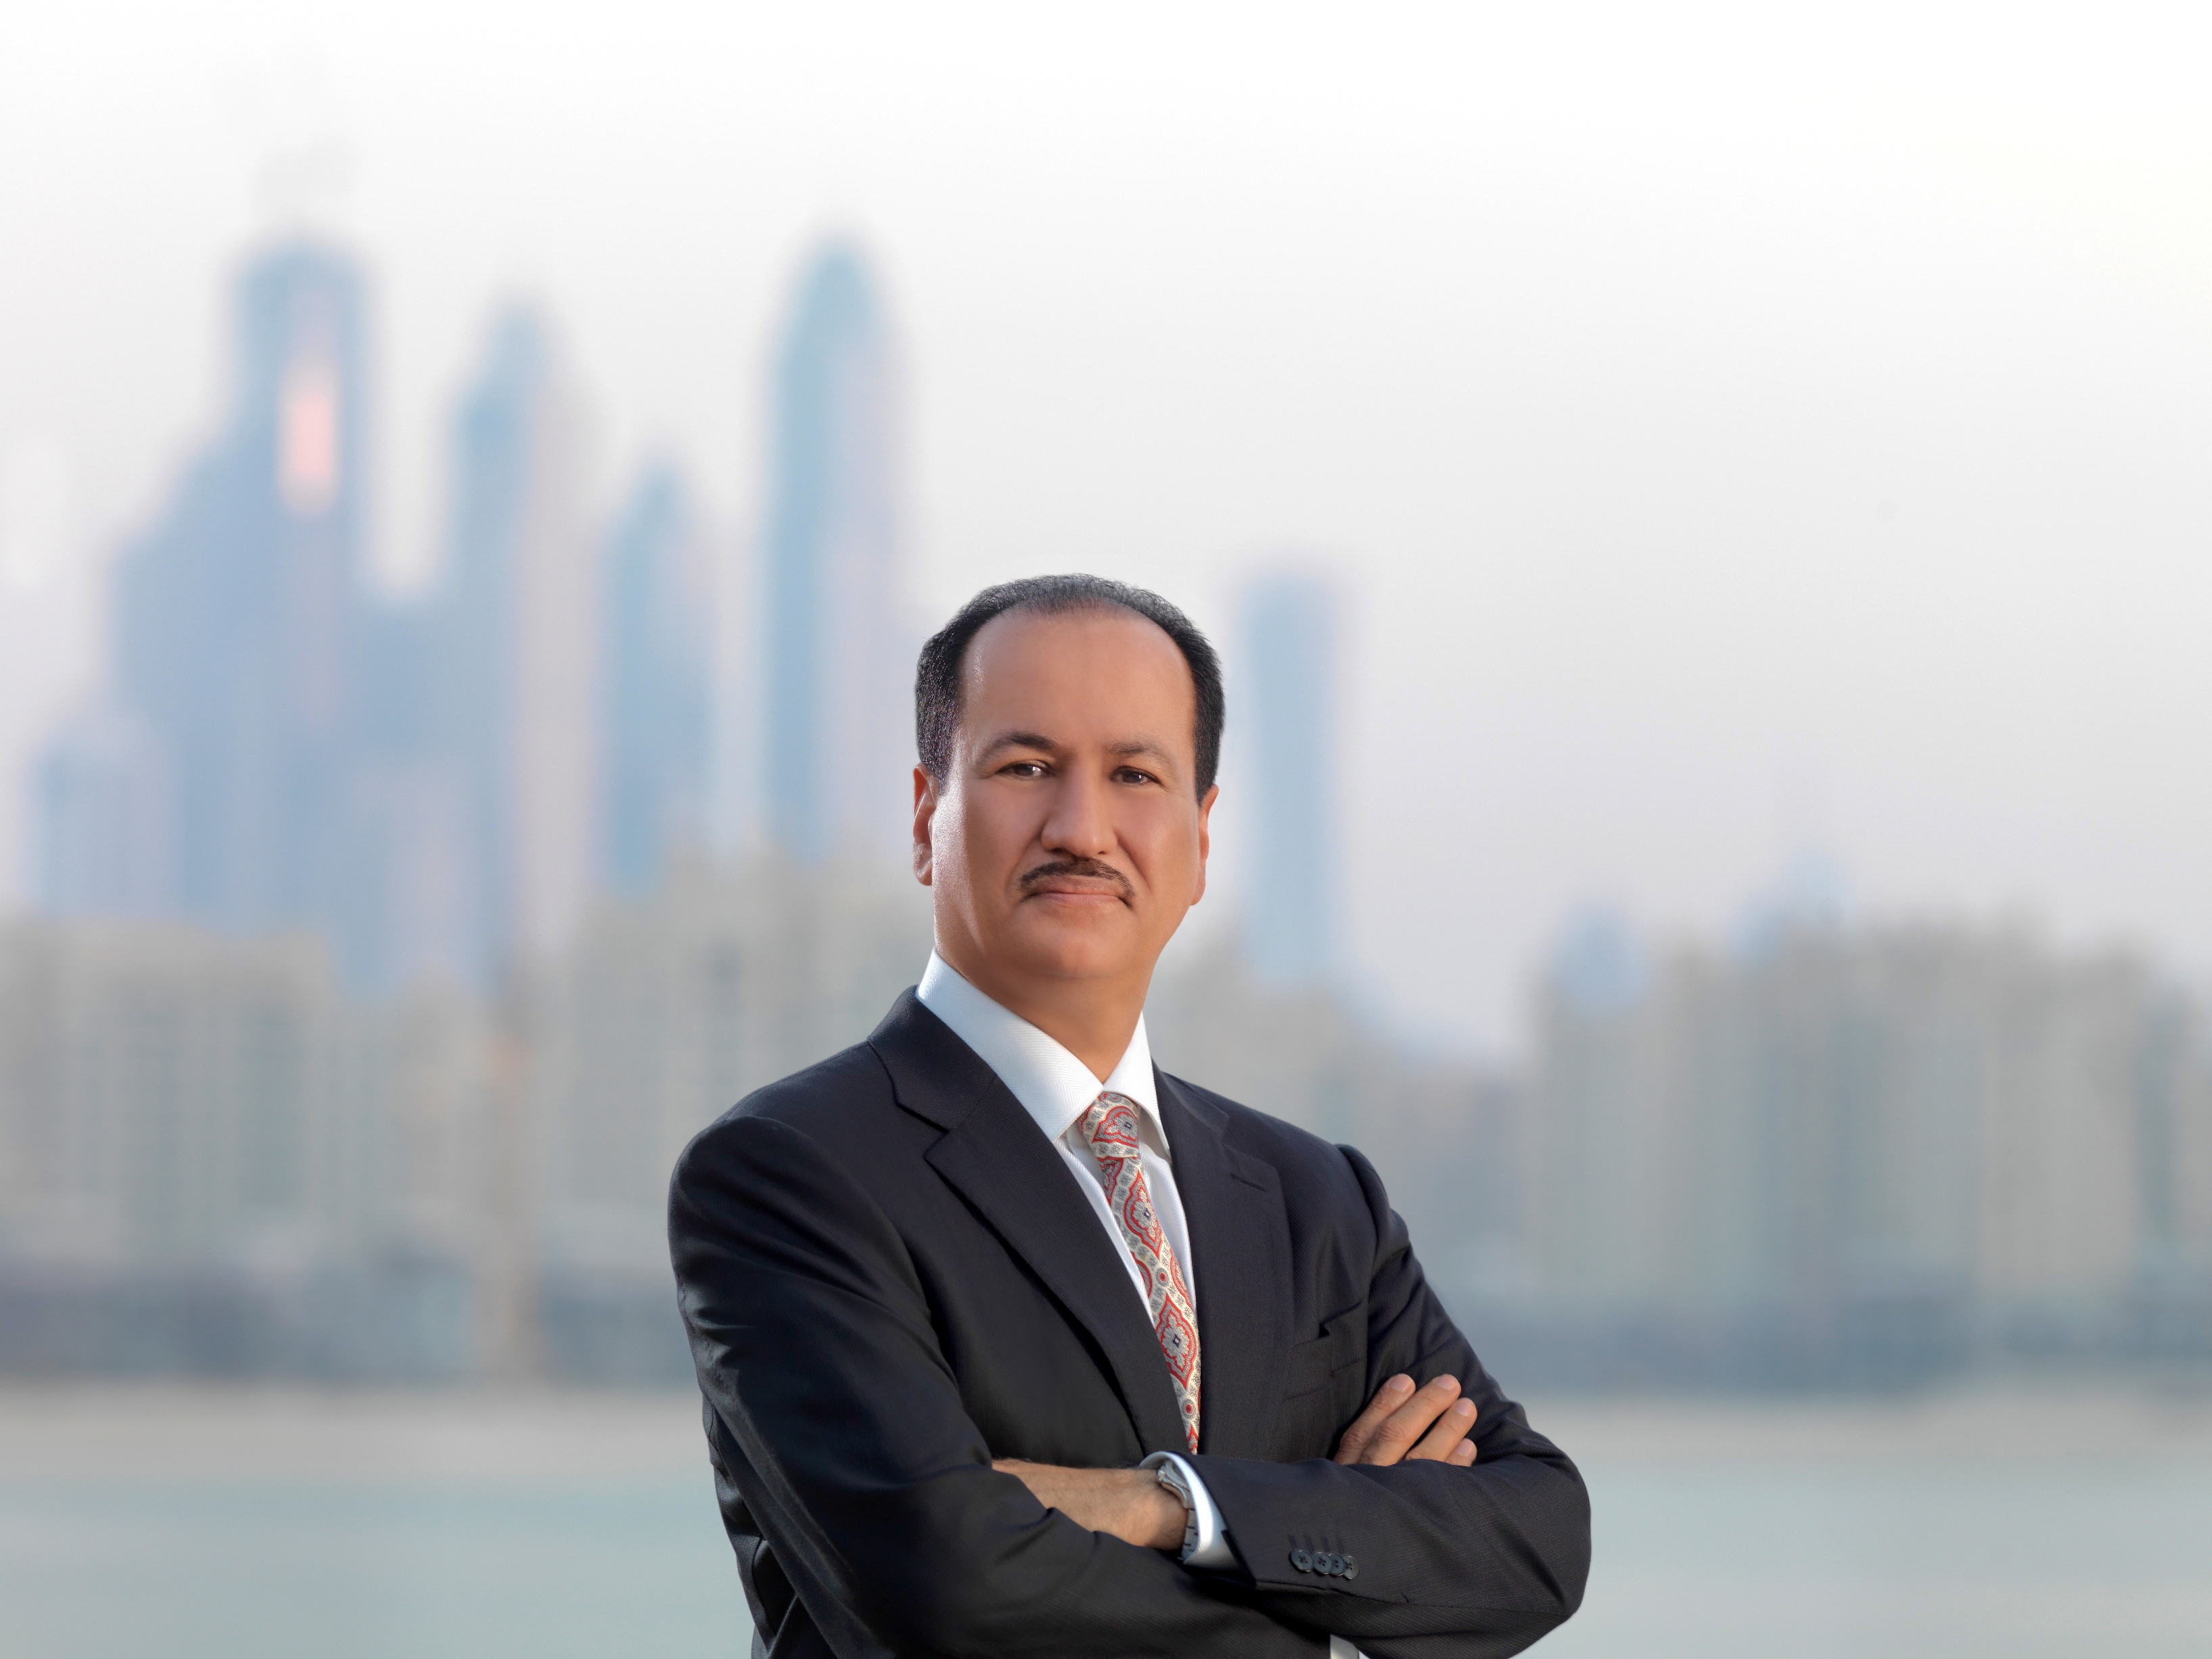 Damac Group’s Hussain Sajwani keen to explore investment opportunities in Germany